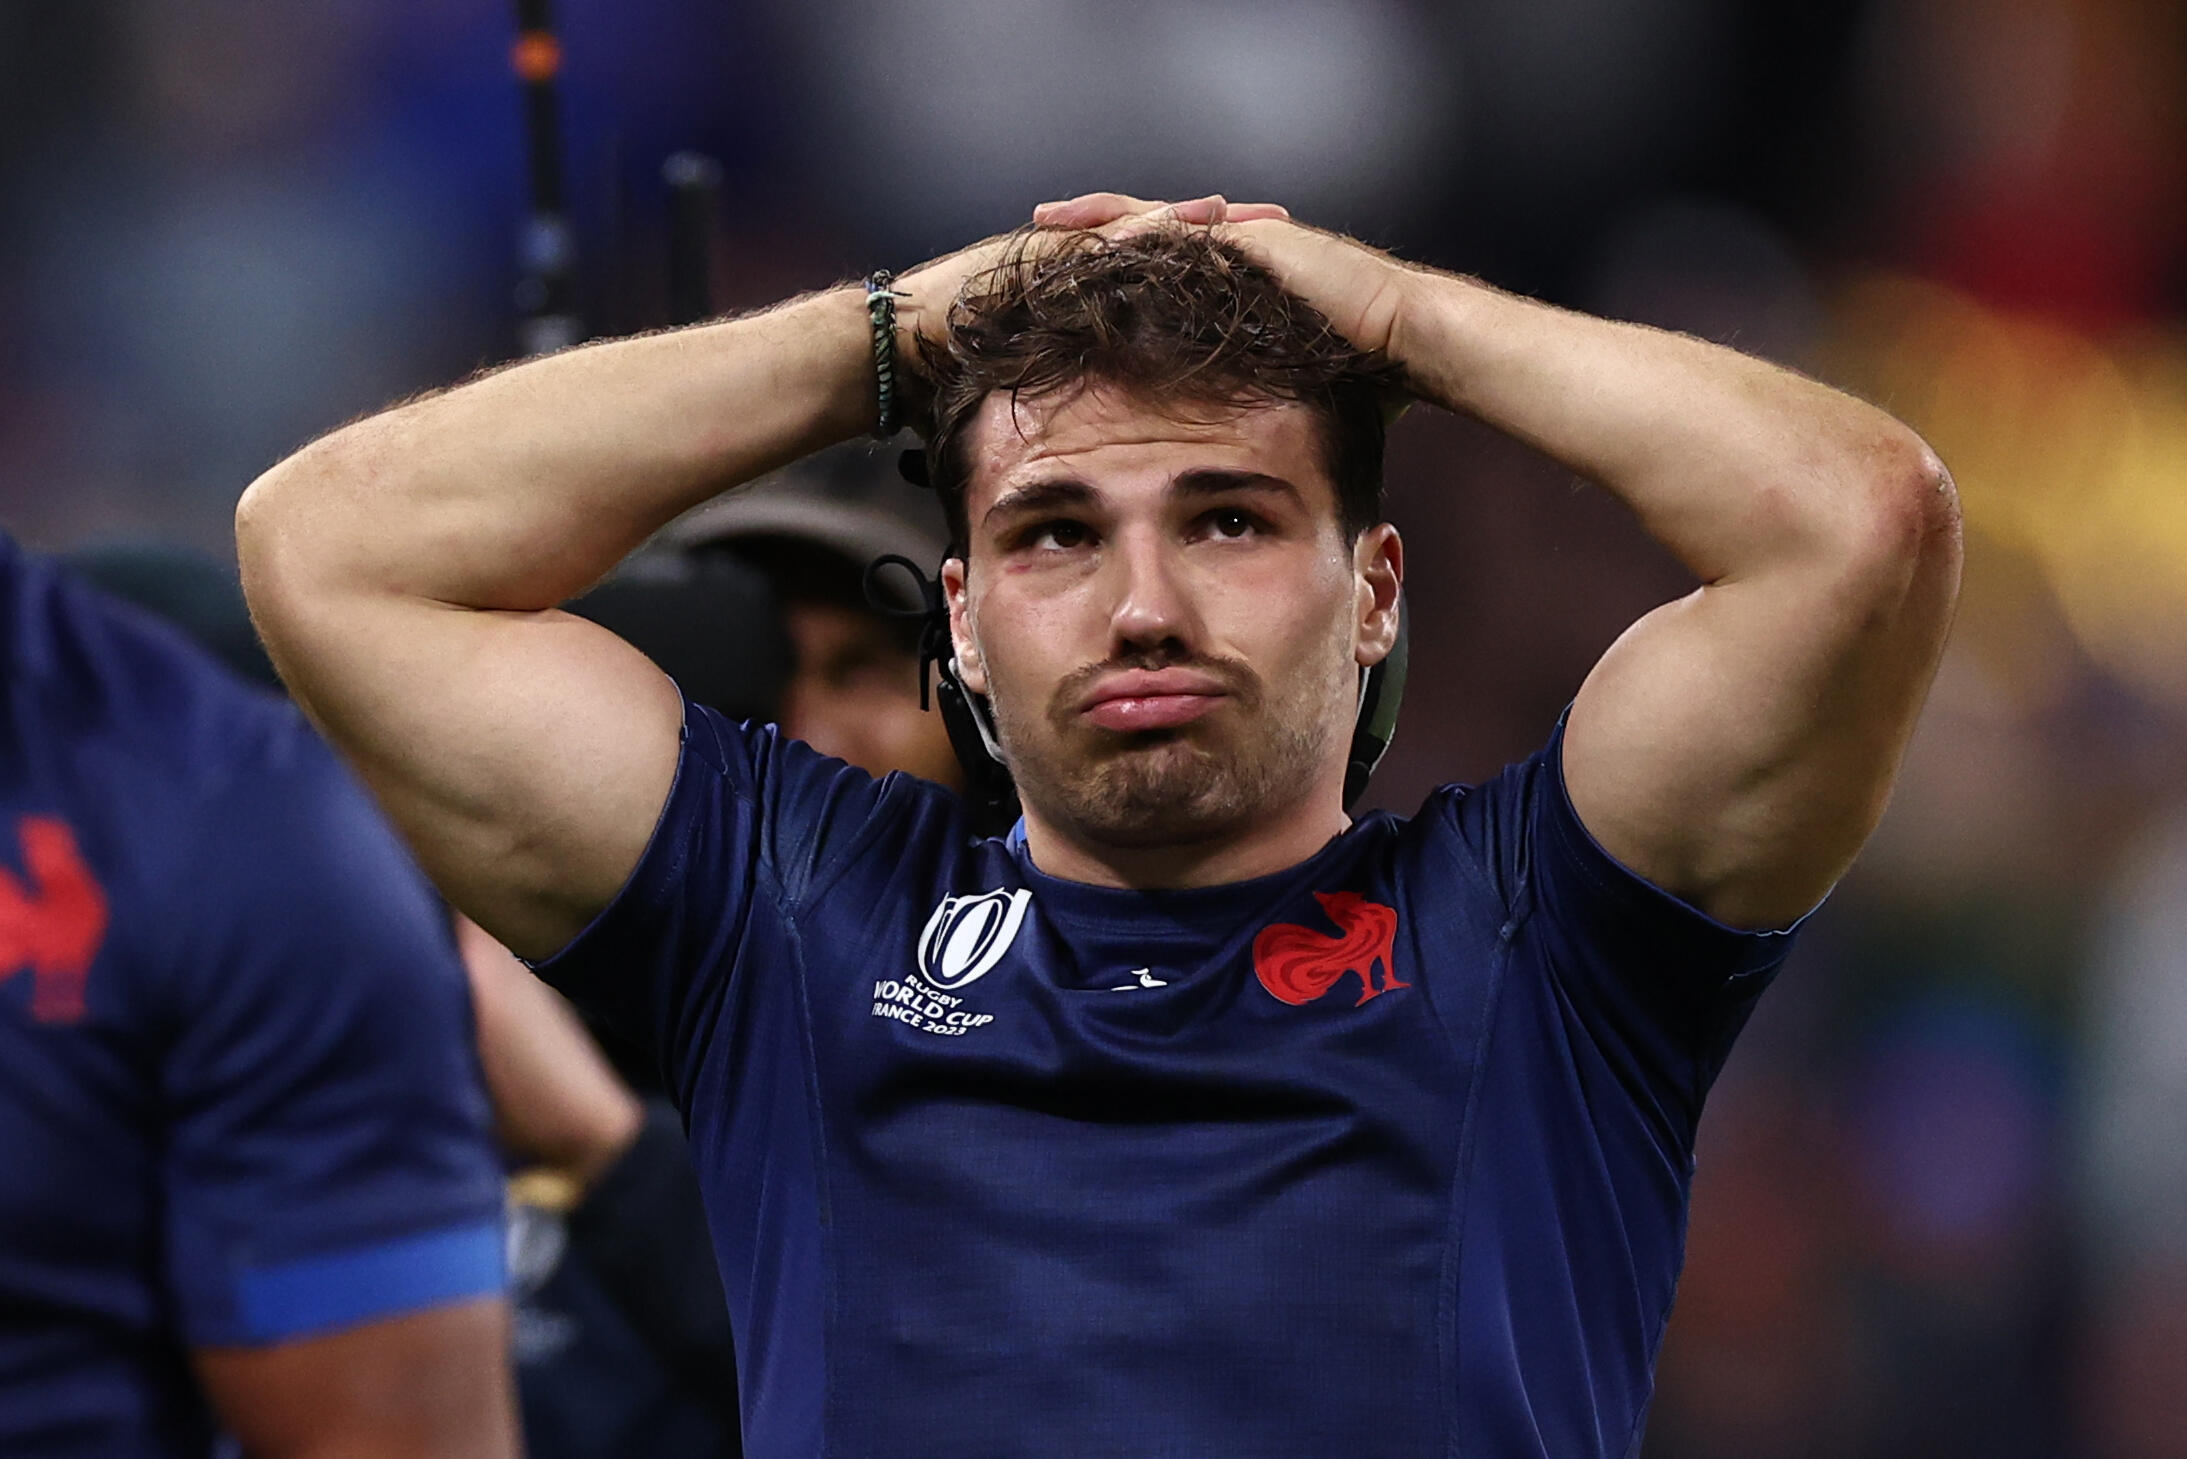 Antoine Dupont's disappointment after the defeat of the Blues in the quarter-final of the World Cup at home against South Africa